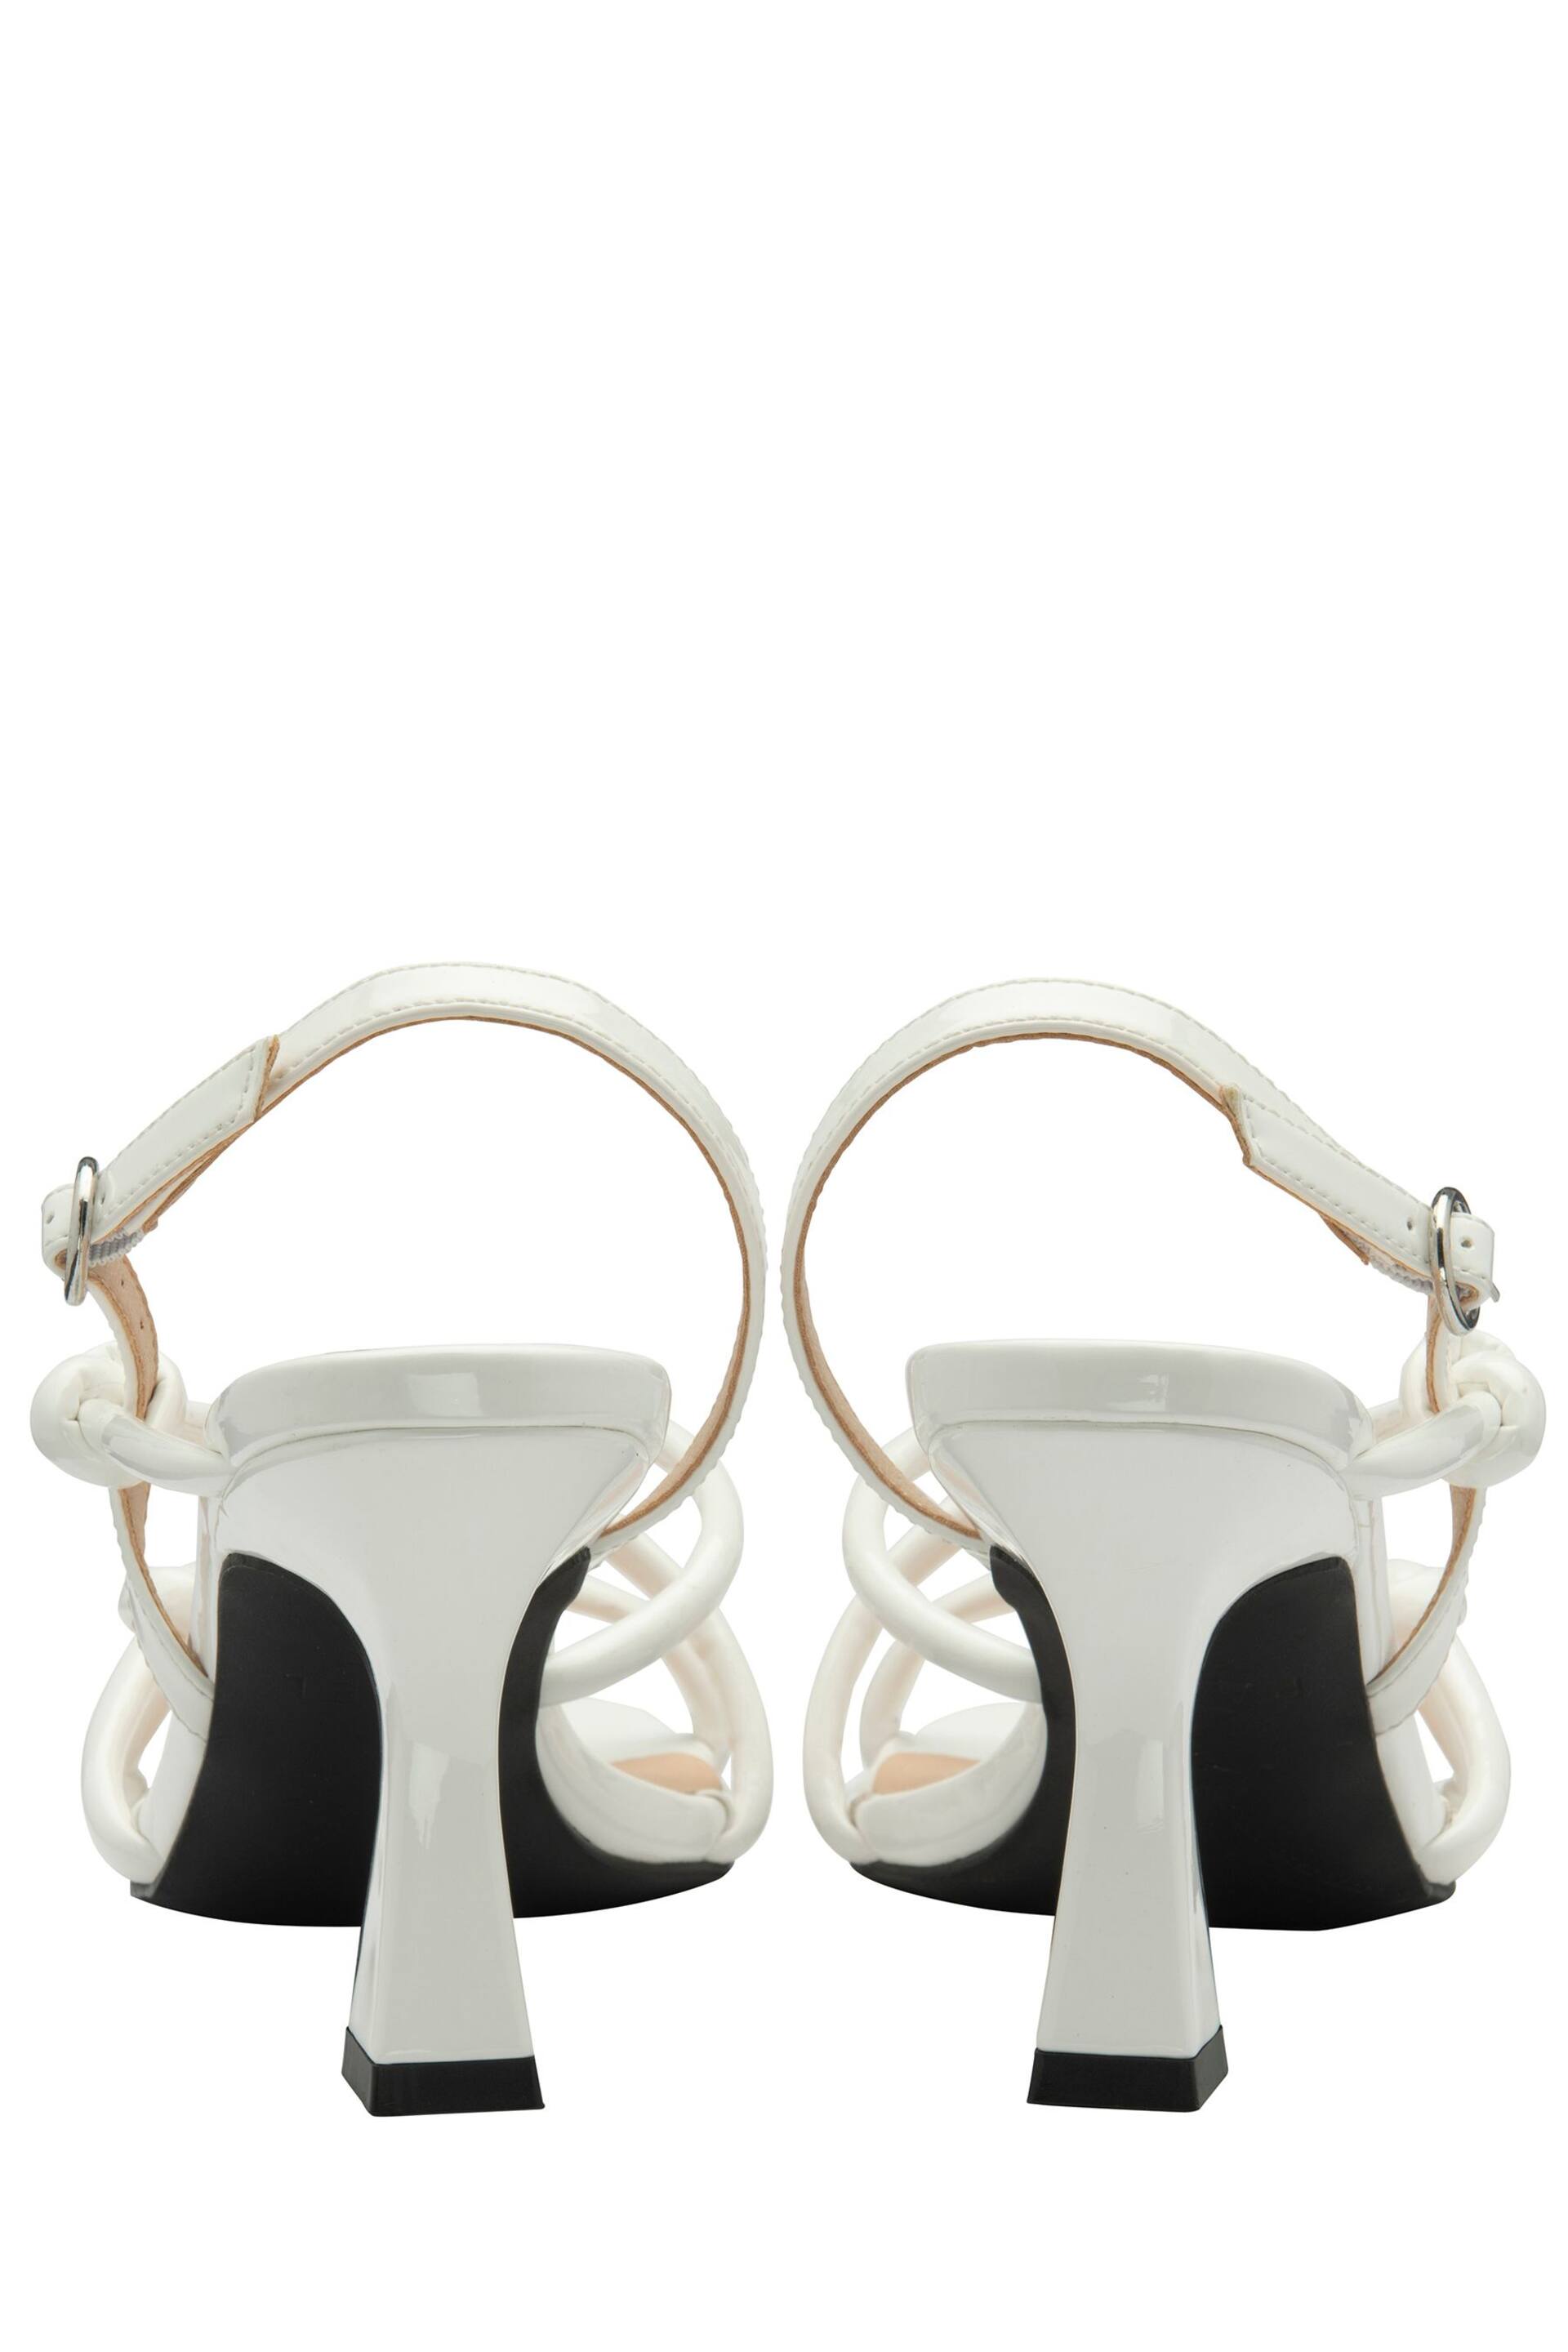 Ravel White Open Toe Strappy Sandals - Image 3 of 4